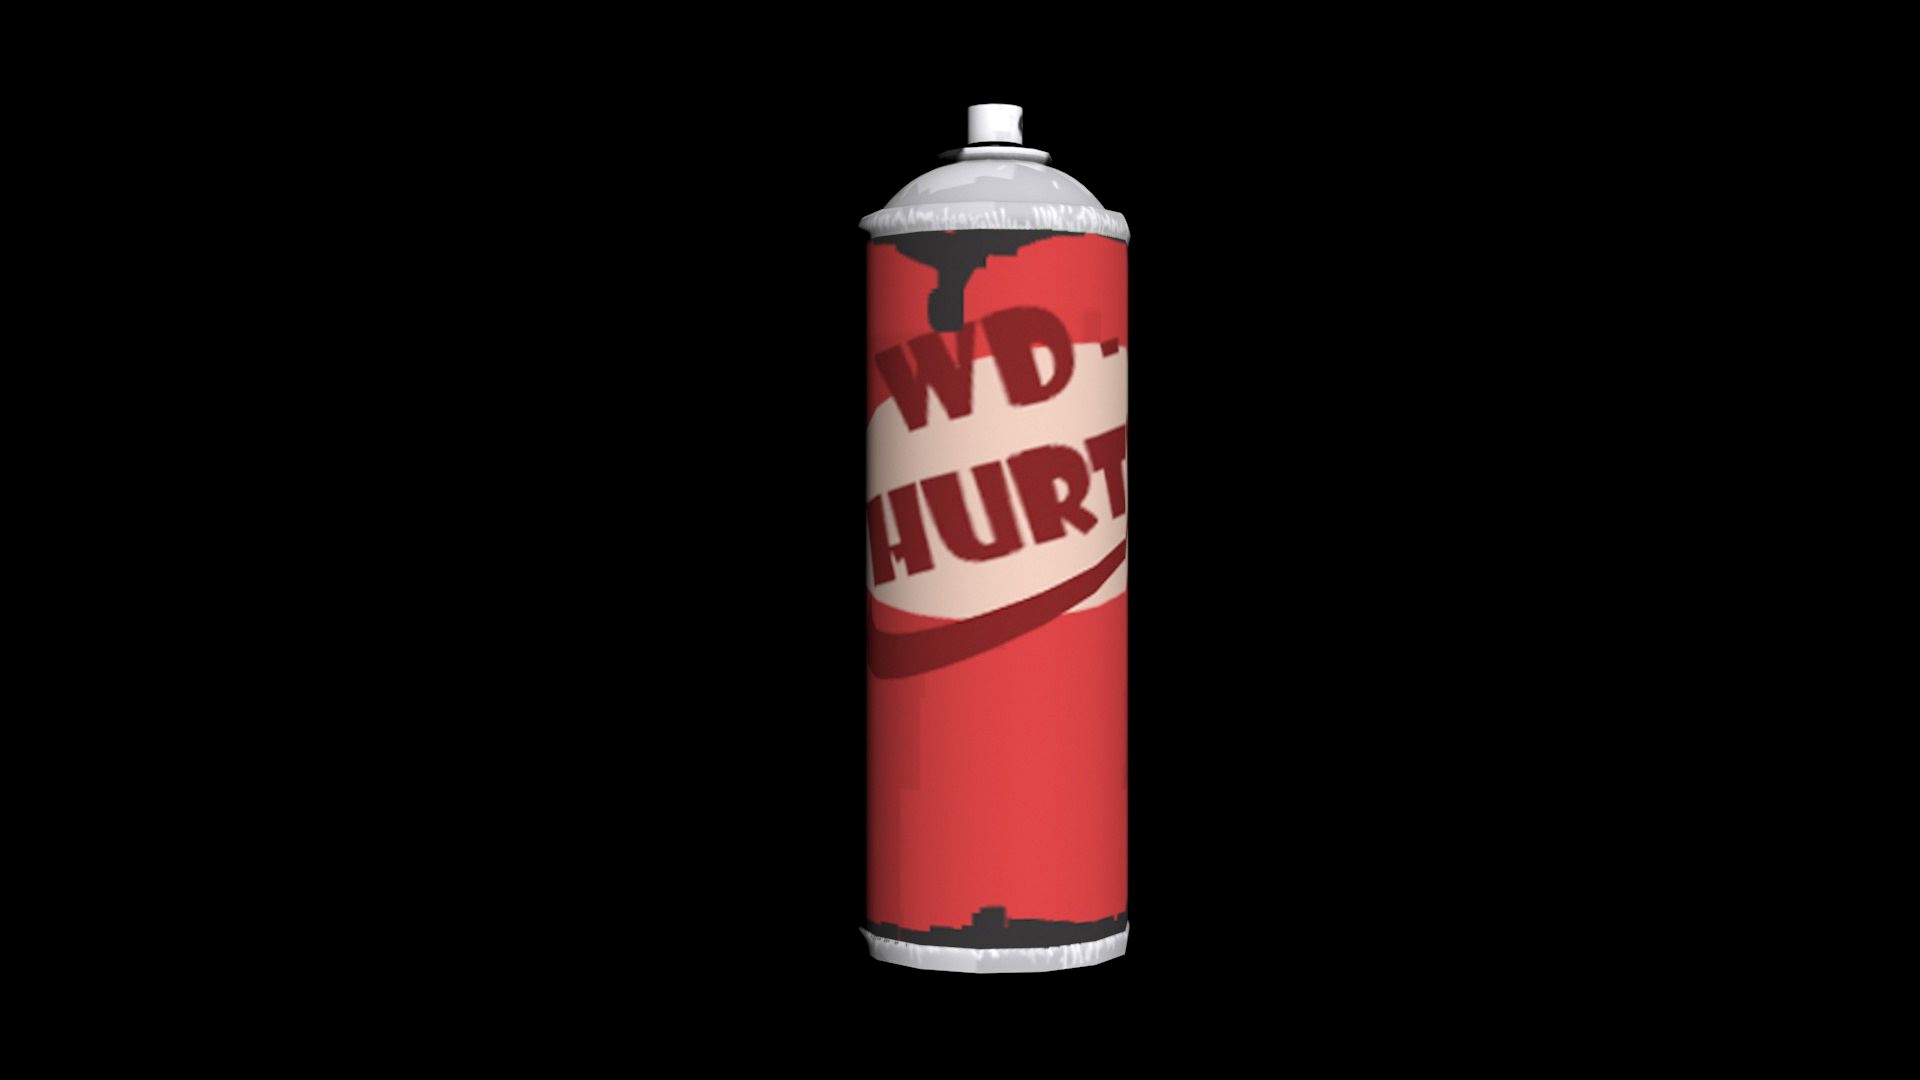 Spray Can - WD Hurty